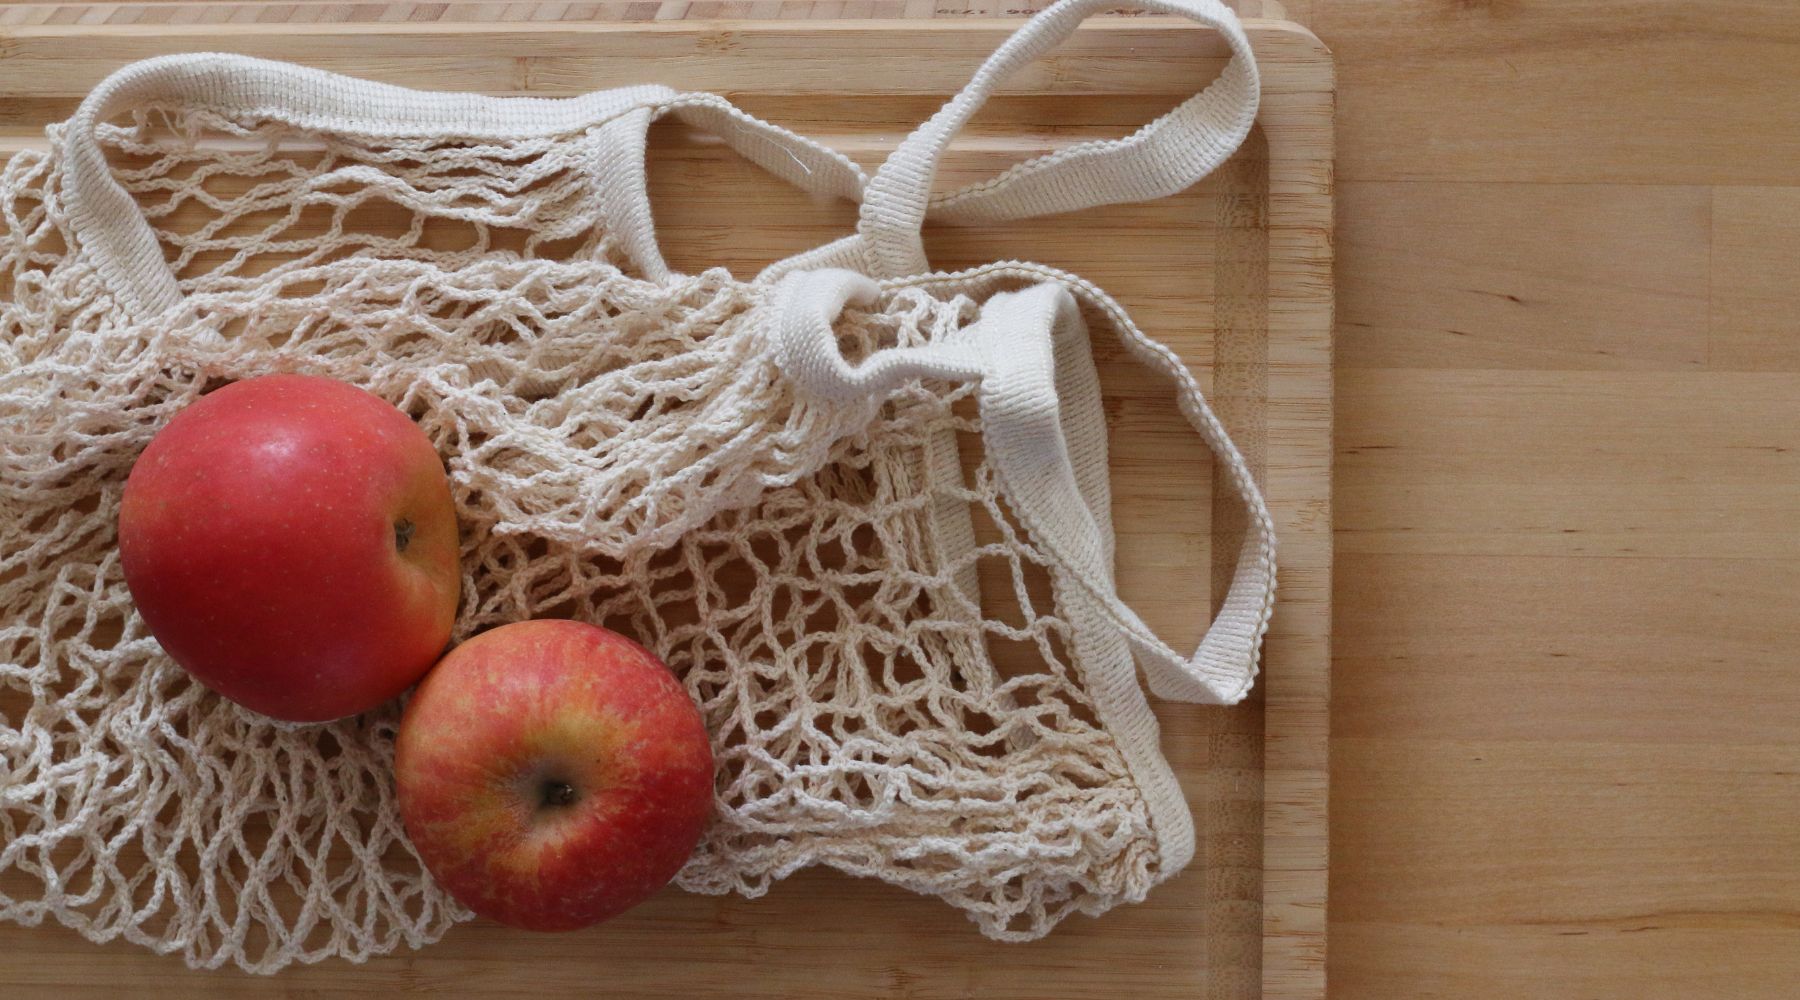 Mesh reusable bag laying on a wood cutting board with two apples on top